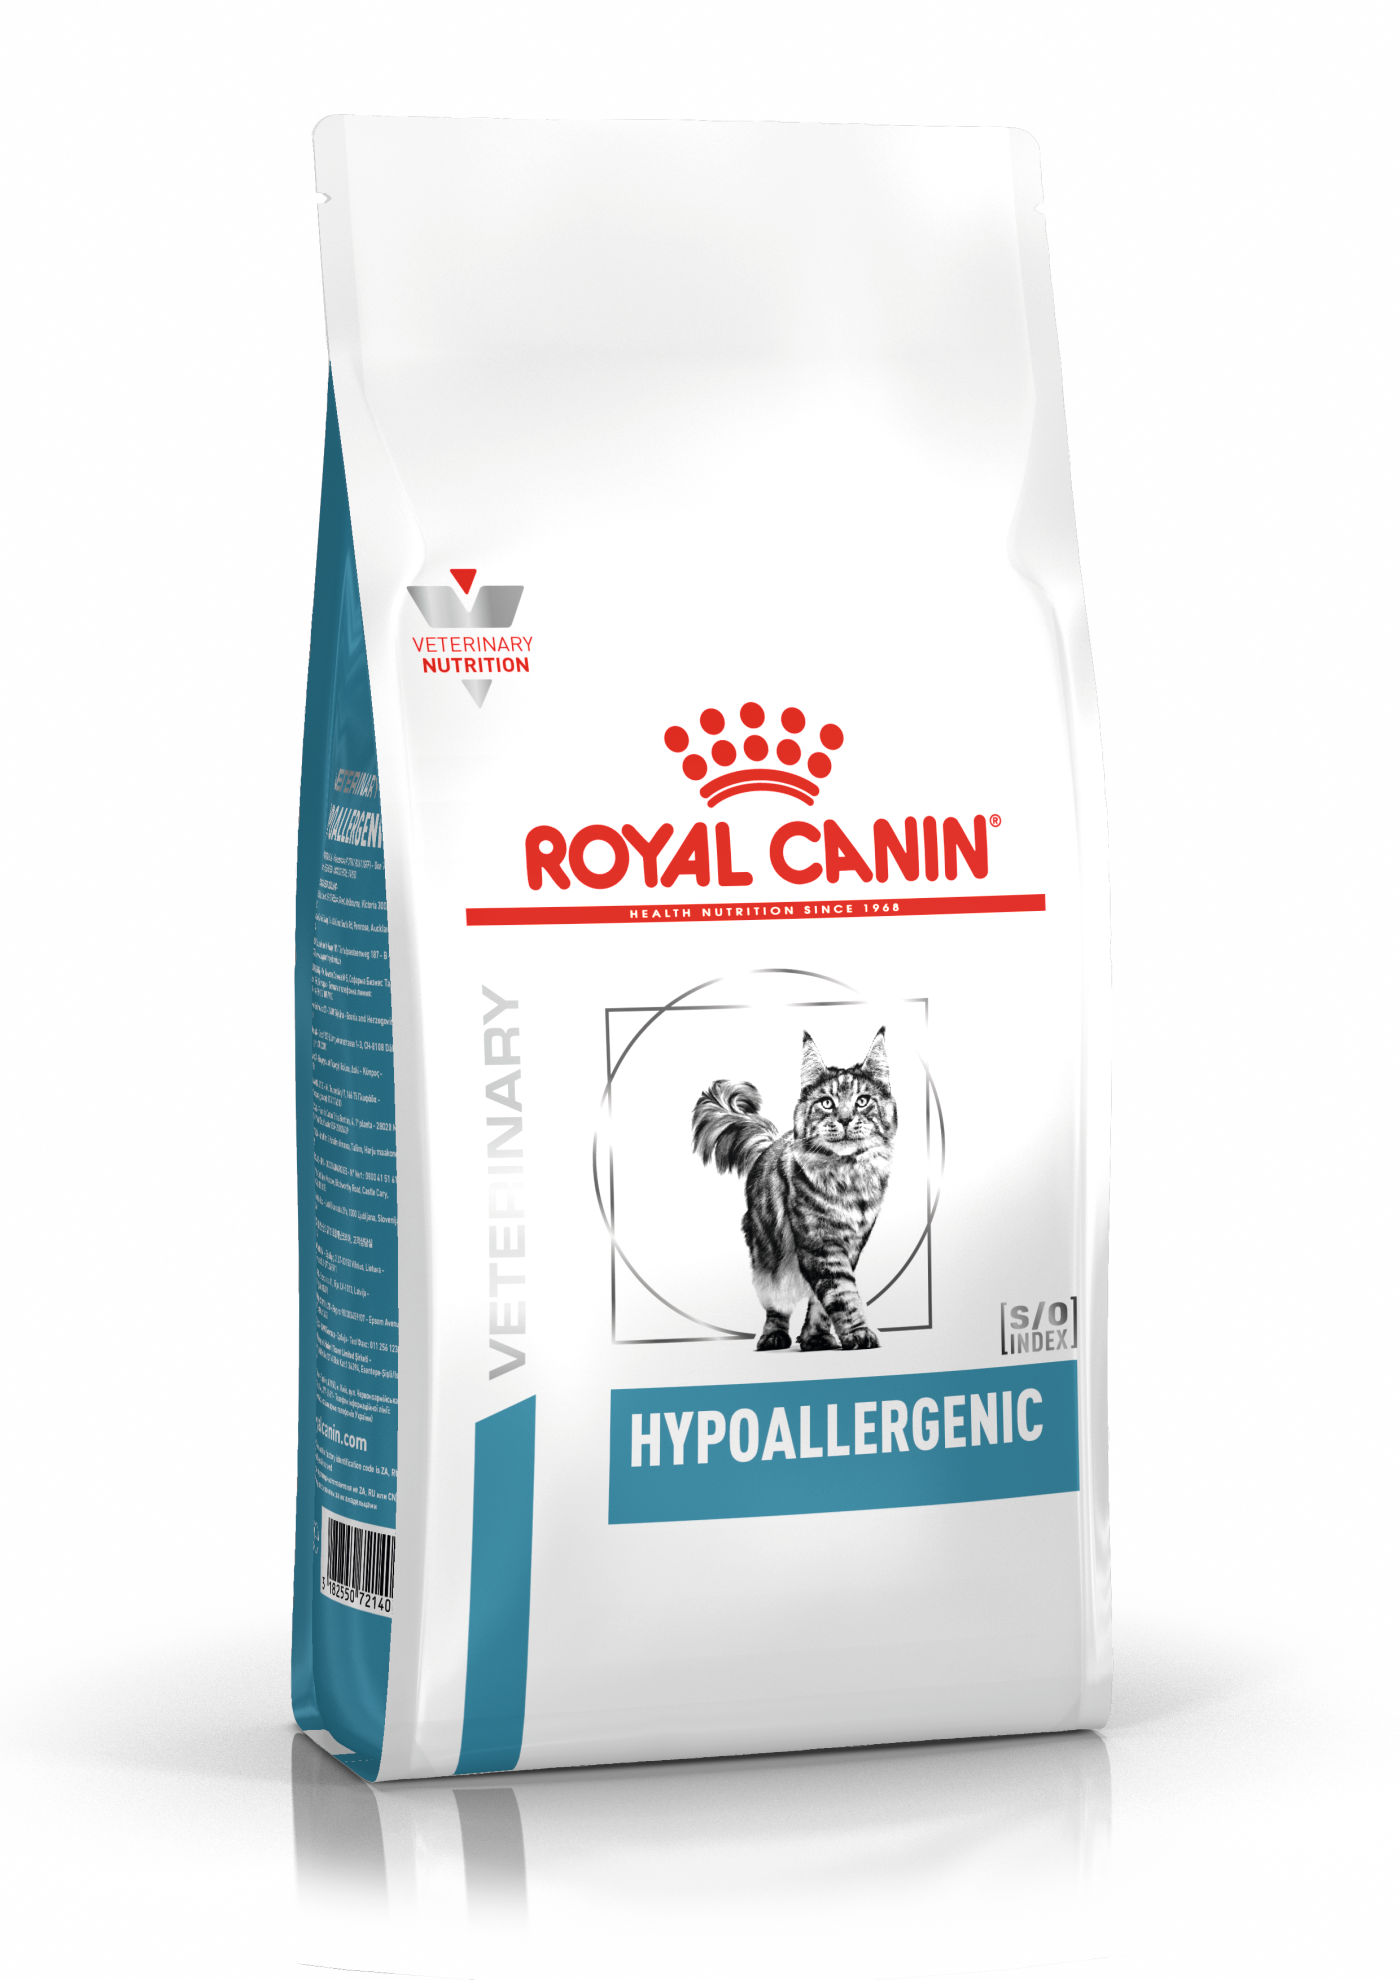 royal canin hypoallergenic cat food